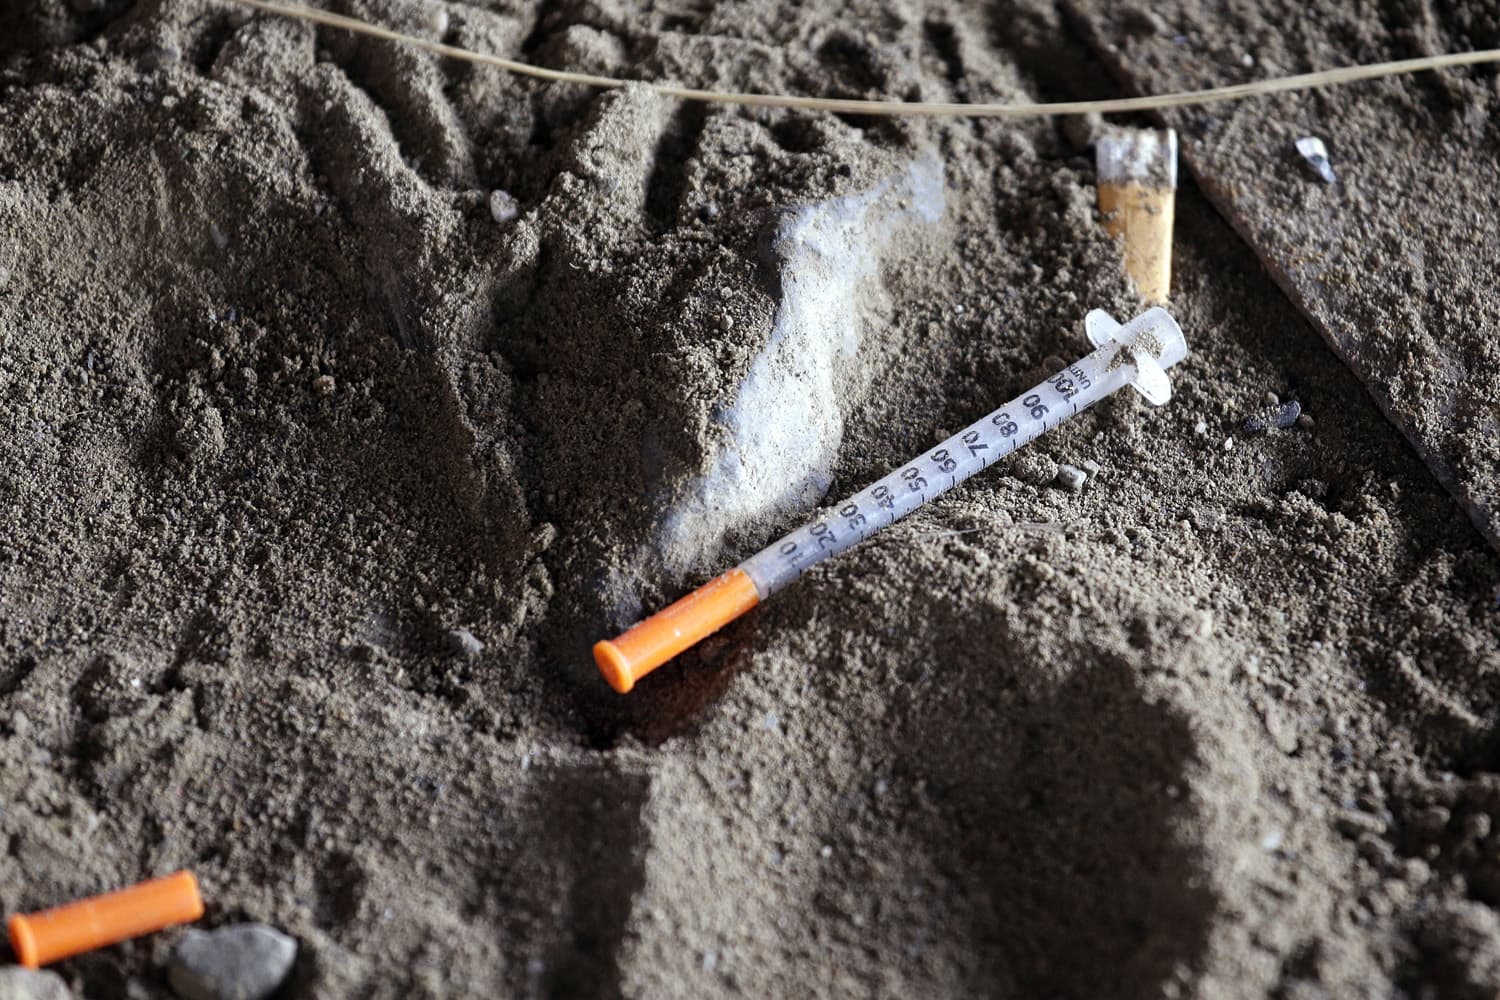 A discarded syringe sits in the dirt with other debris under a highway overpass in Washington state. (Elaine Thompson/AP)